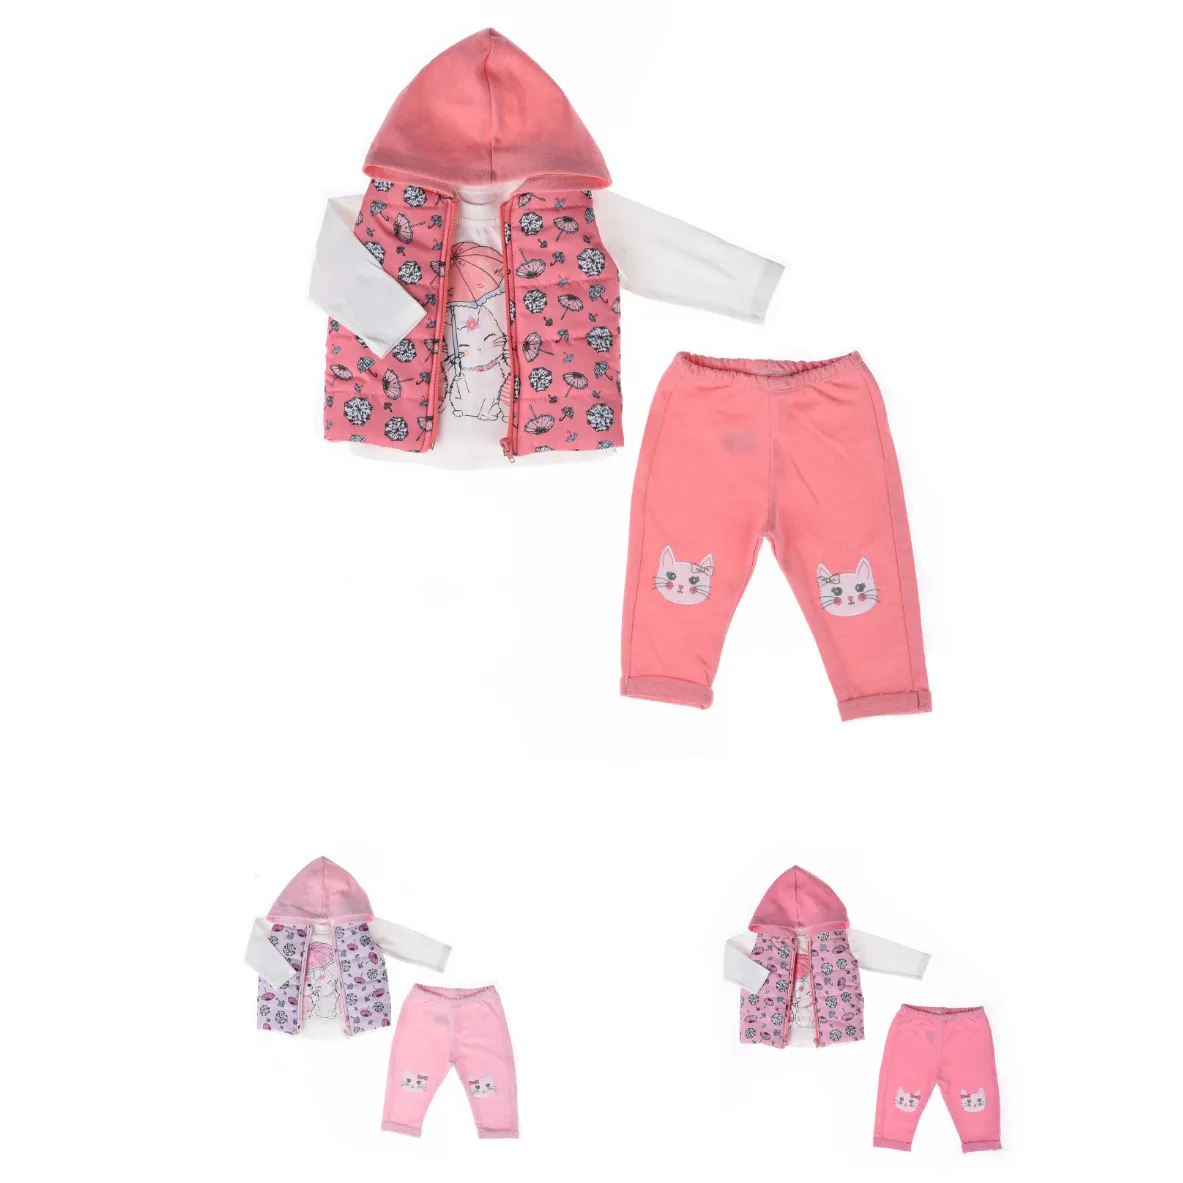 Hot Sale ! Umbrella 3 Pcs Baby Girls' Clothing Sets With Vest Girl Soft Cotton Baby Clothes By Necix's Brand